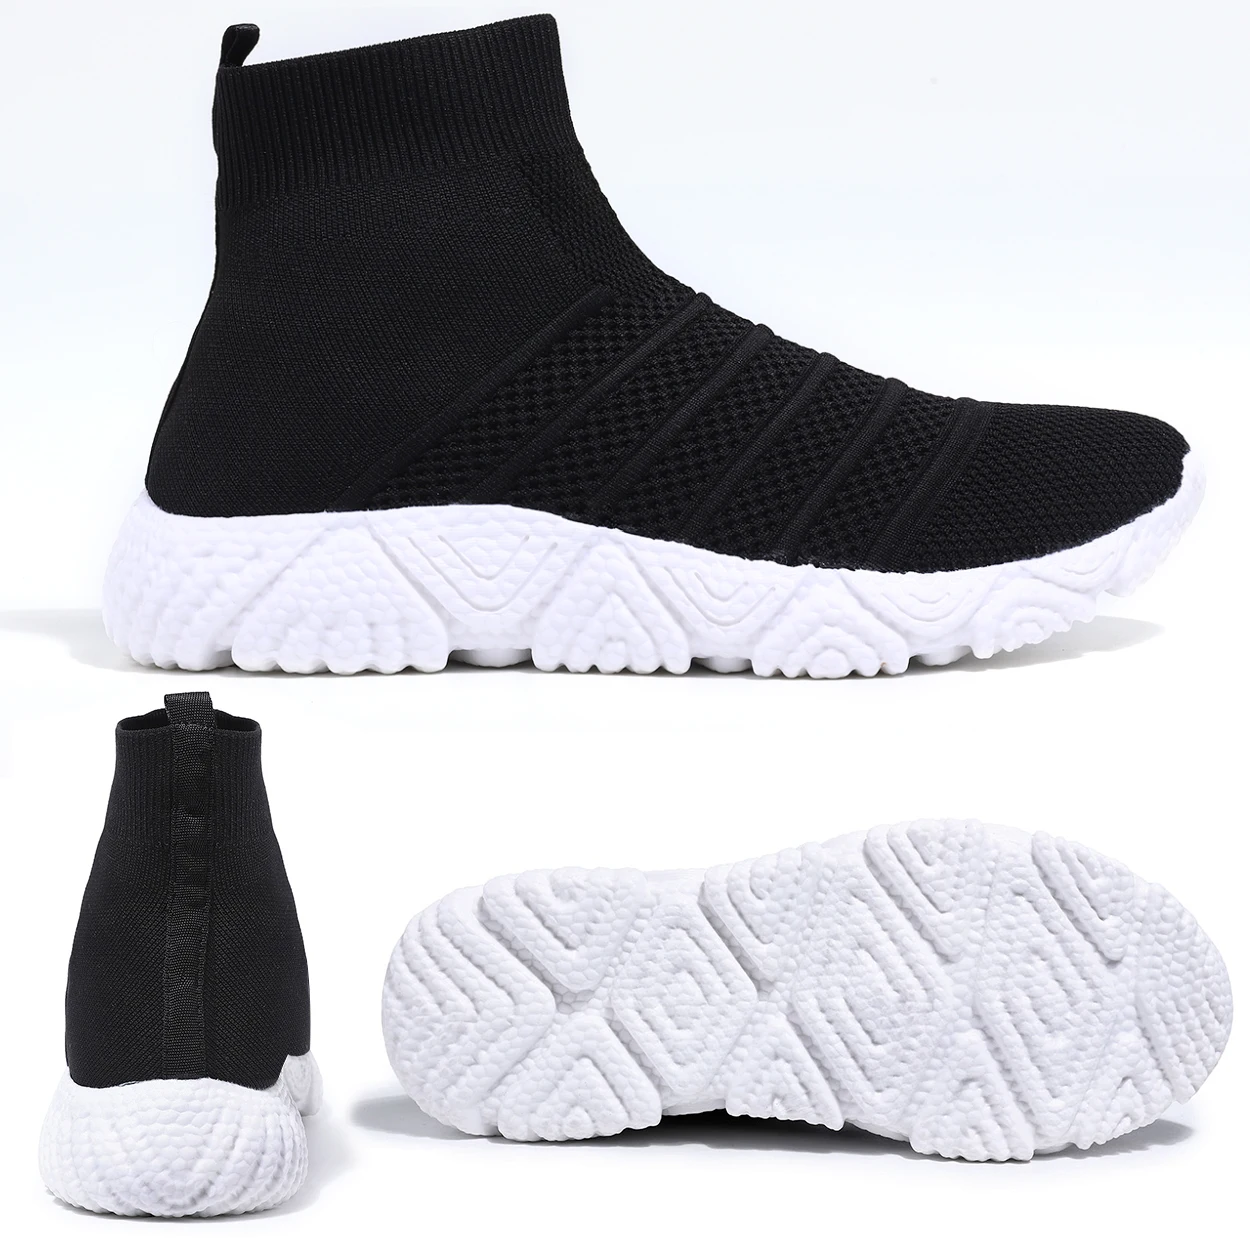 

New Arrival men shoes arch support slip-on anti-slippery light wight women sneaker shoes outdoor sport casual sock shoes, 5 color